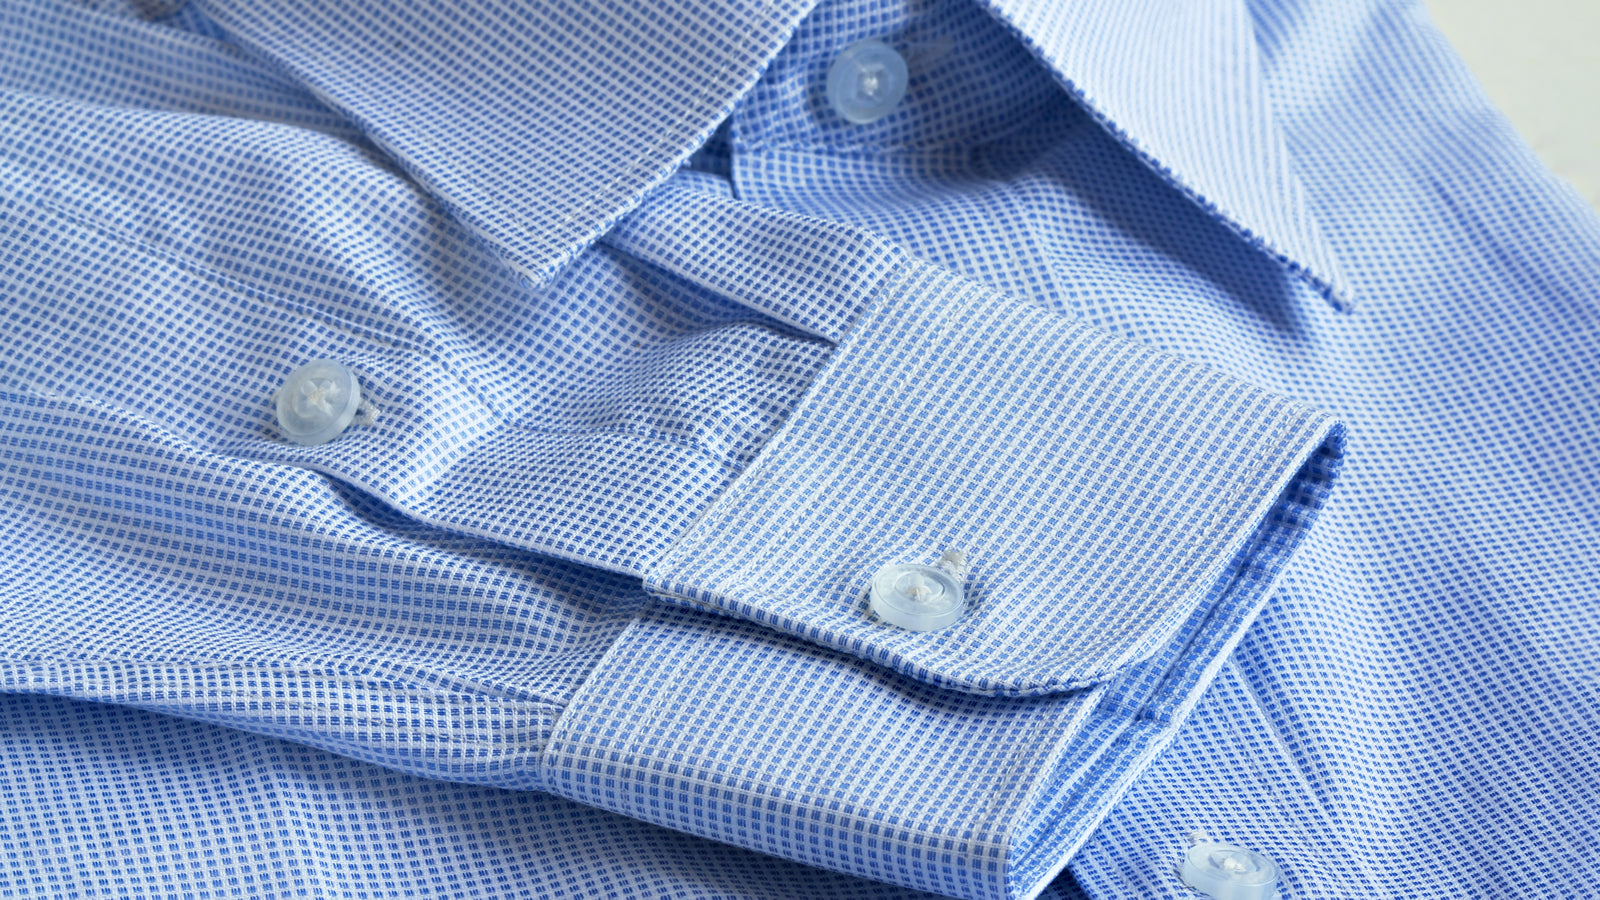 Investing in Quality: The Difference Between a $100 Custom-Made Shirt and a $30 Shirt